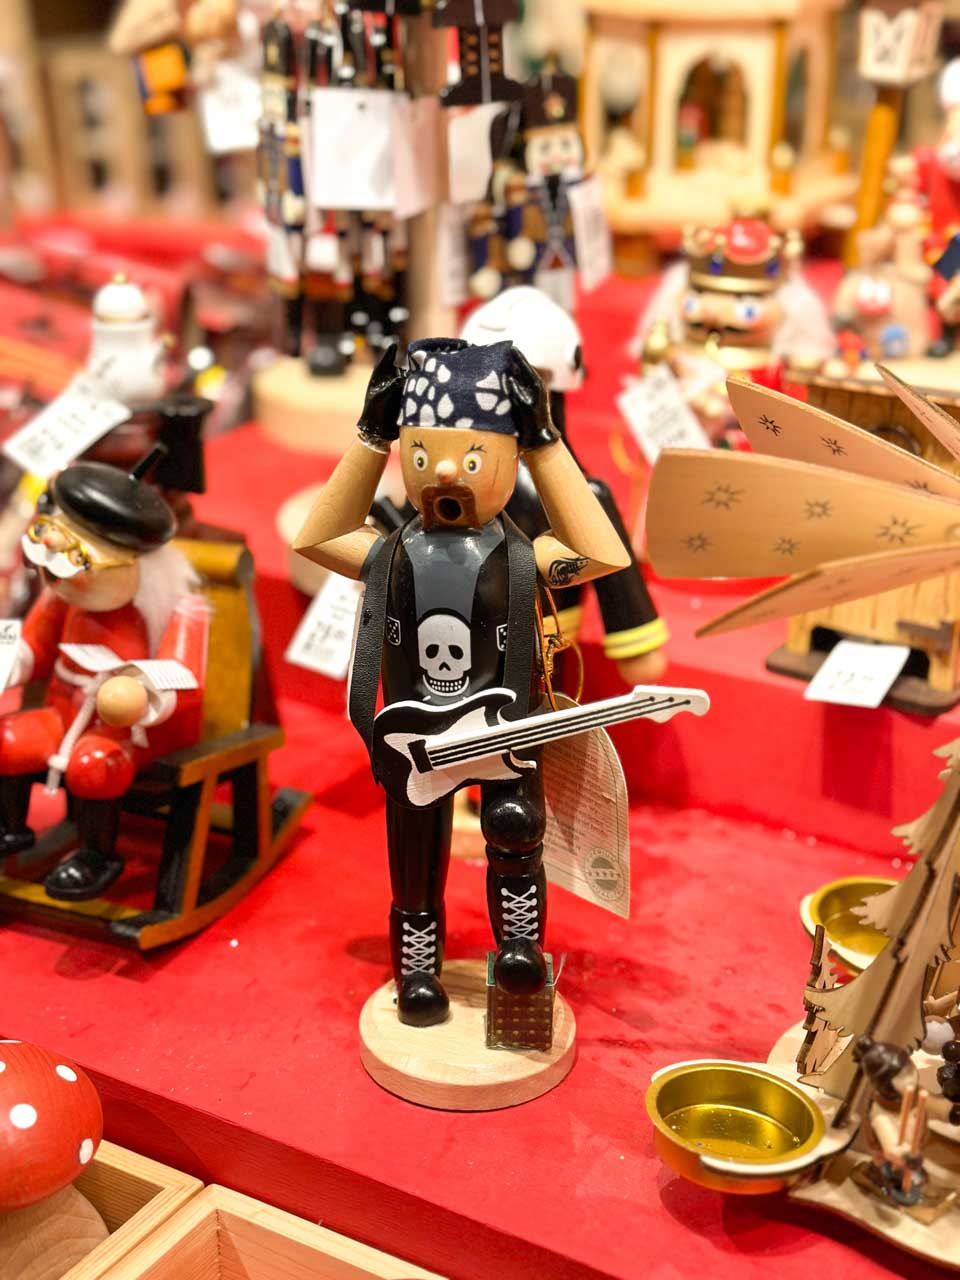 A quirky nutcracker figure styled as a rockstar with a pirate t-shirt, displayed at a Basel Christmas market stall